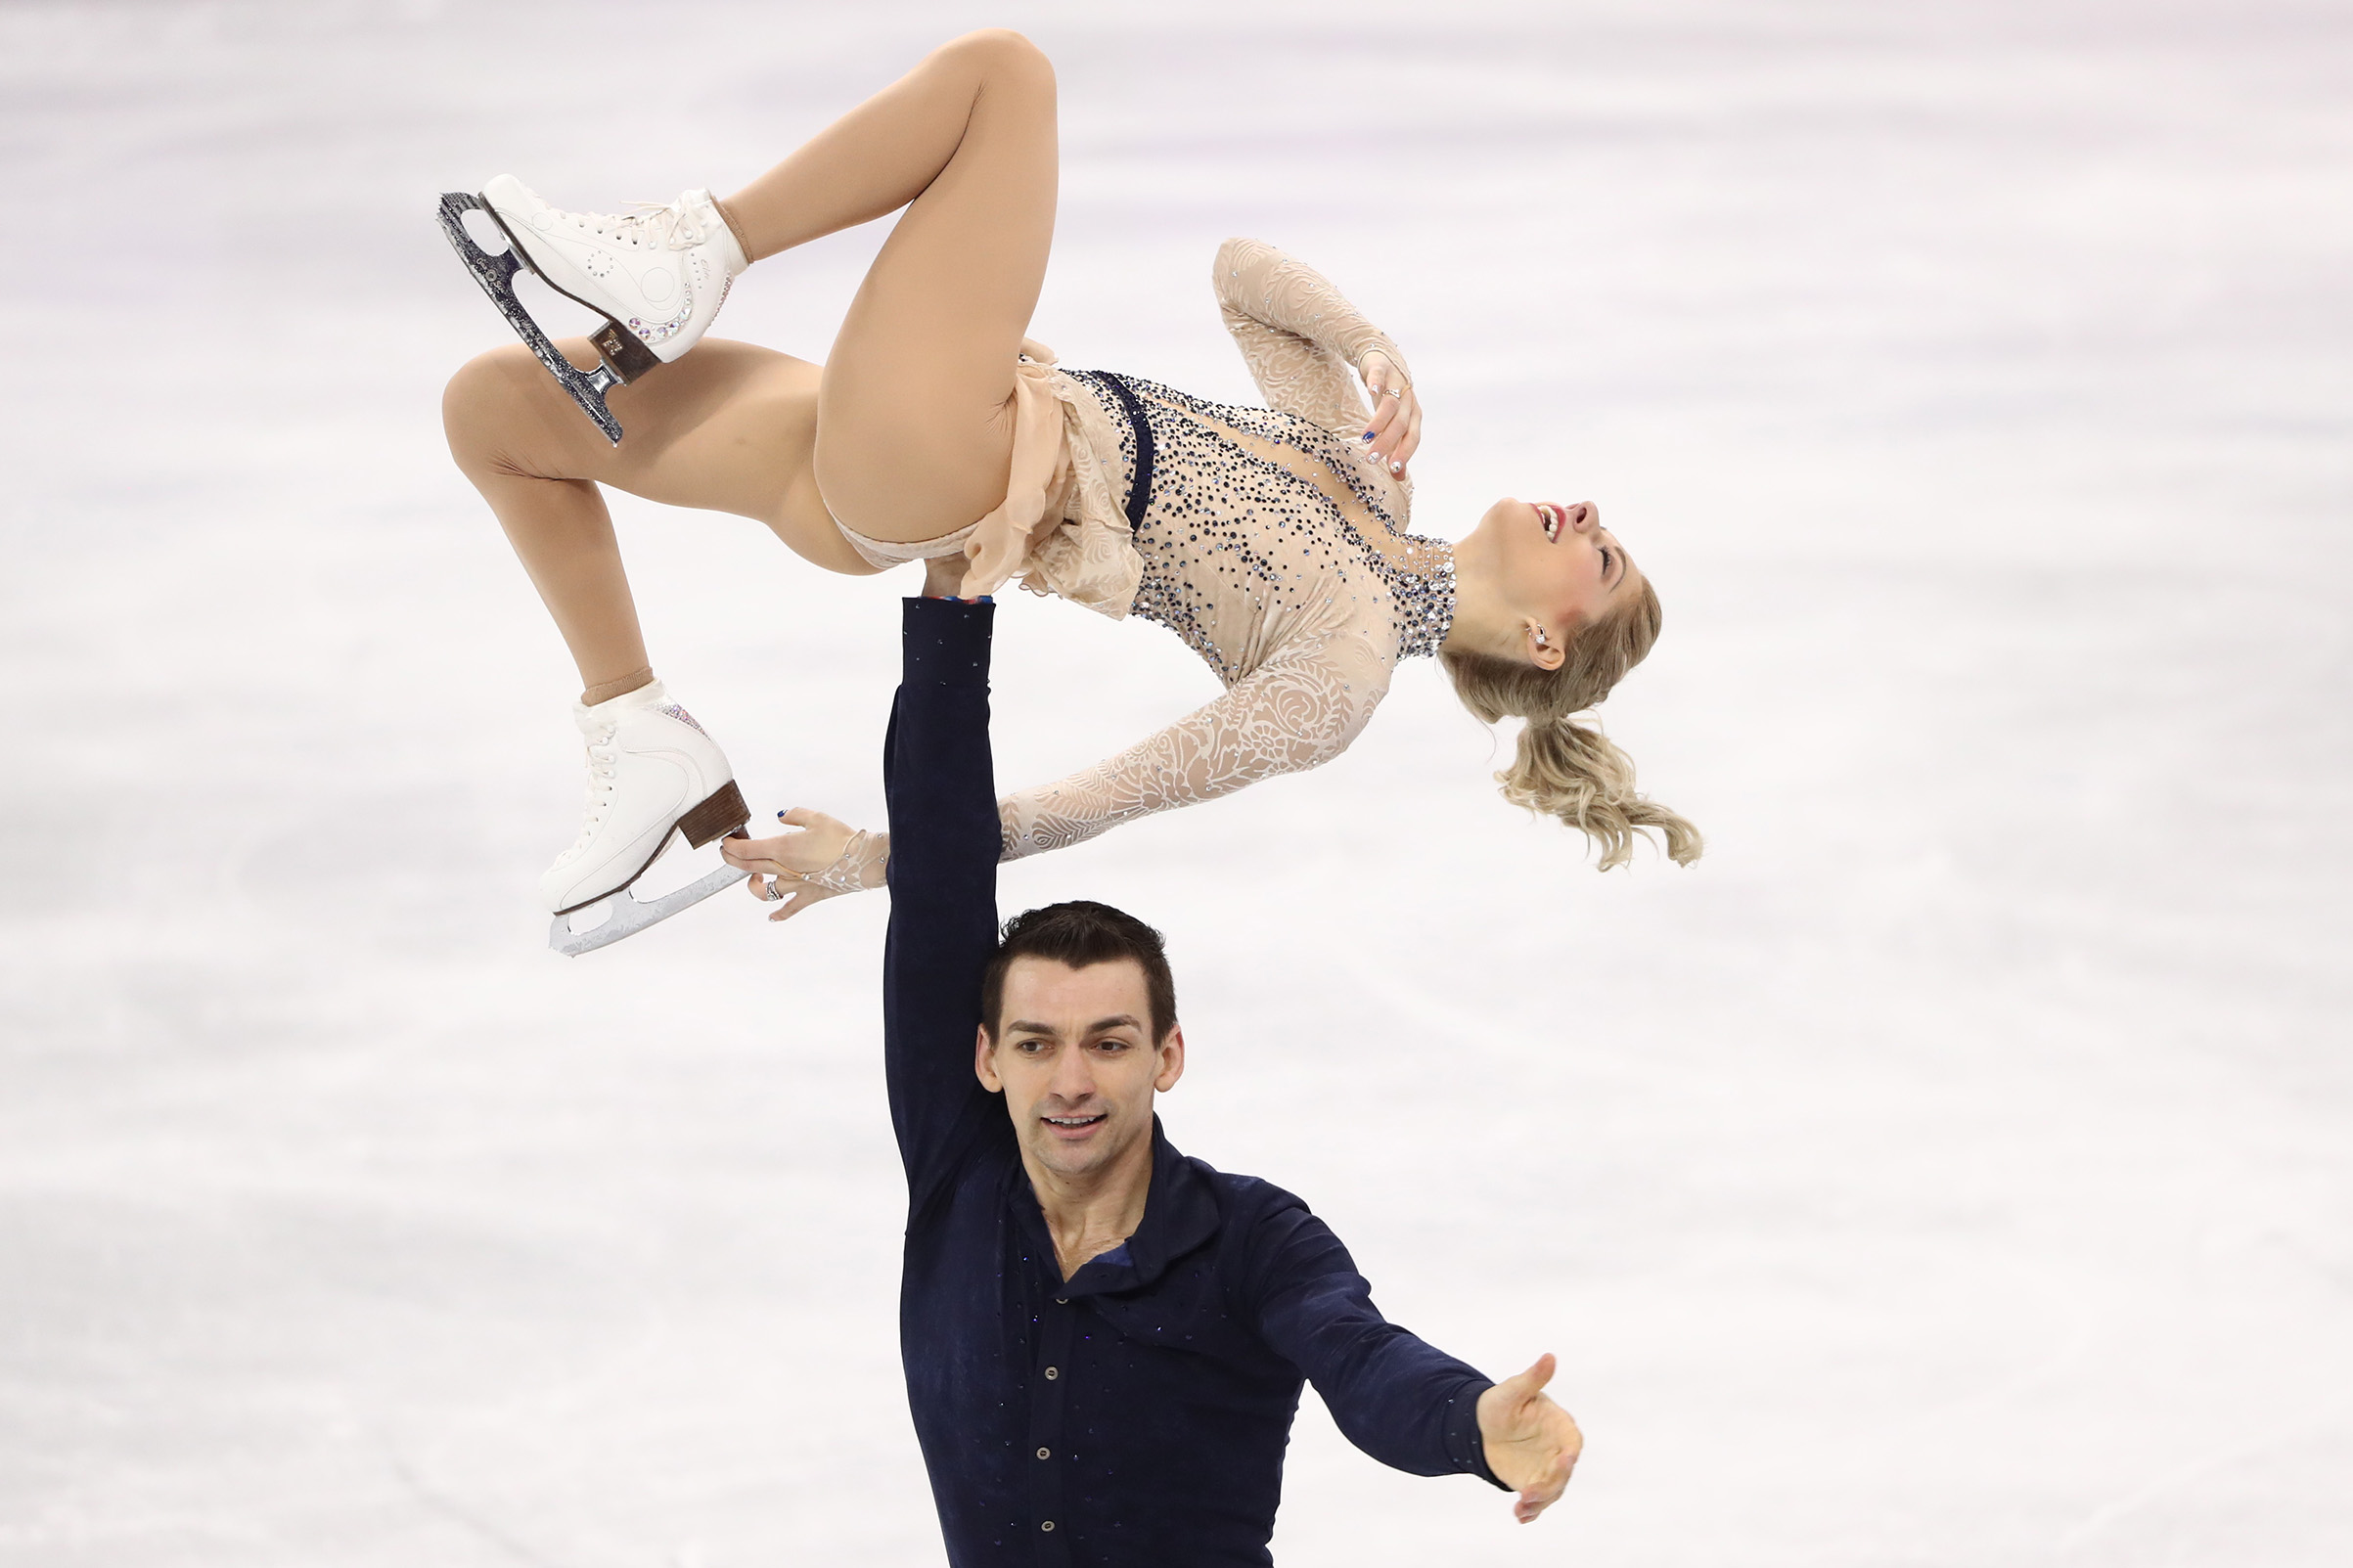 Pair skaters Alexa Scimeca Knierim and Chris Knierim of the USA perform their short program during a figure skating event at the 2018 Winter Olympic Games at Gangneung Ice Arena. (Valery Sharifulin—TASS/Getty Images)